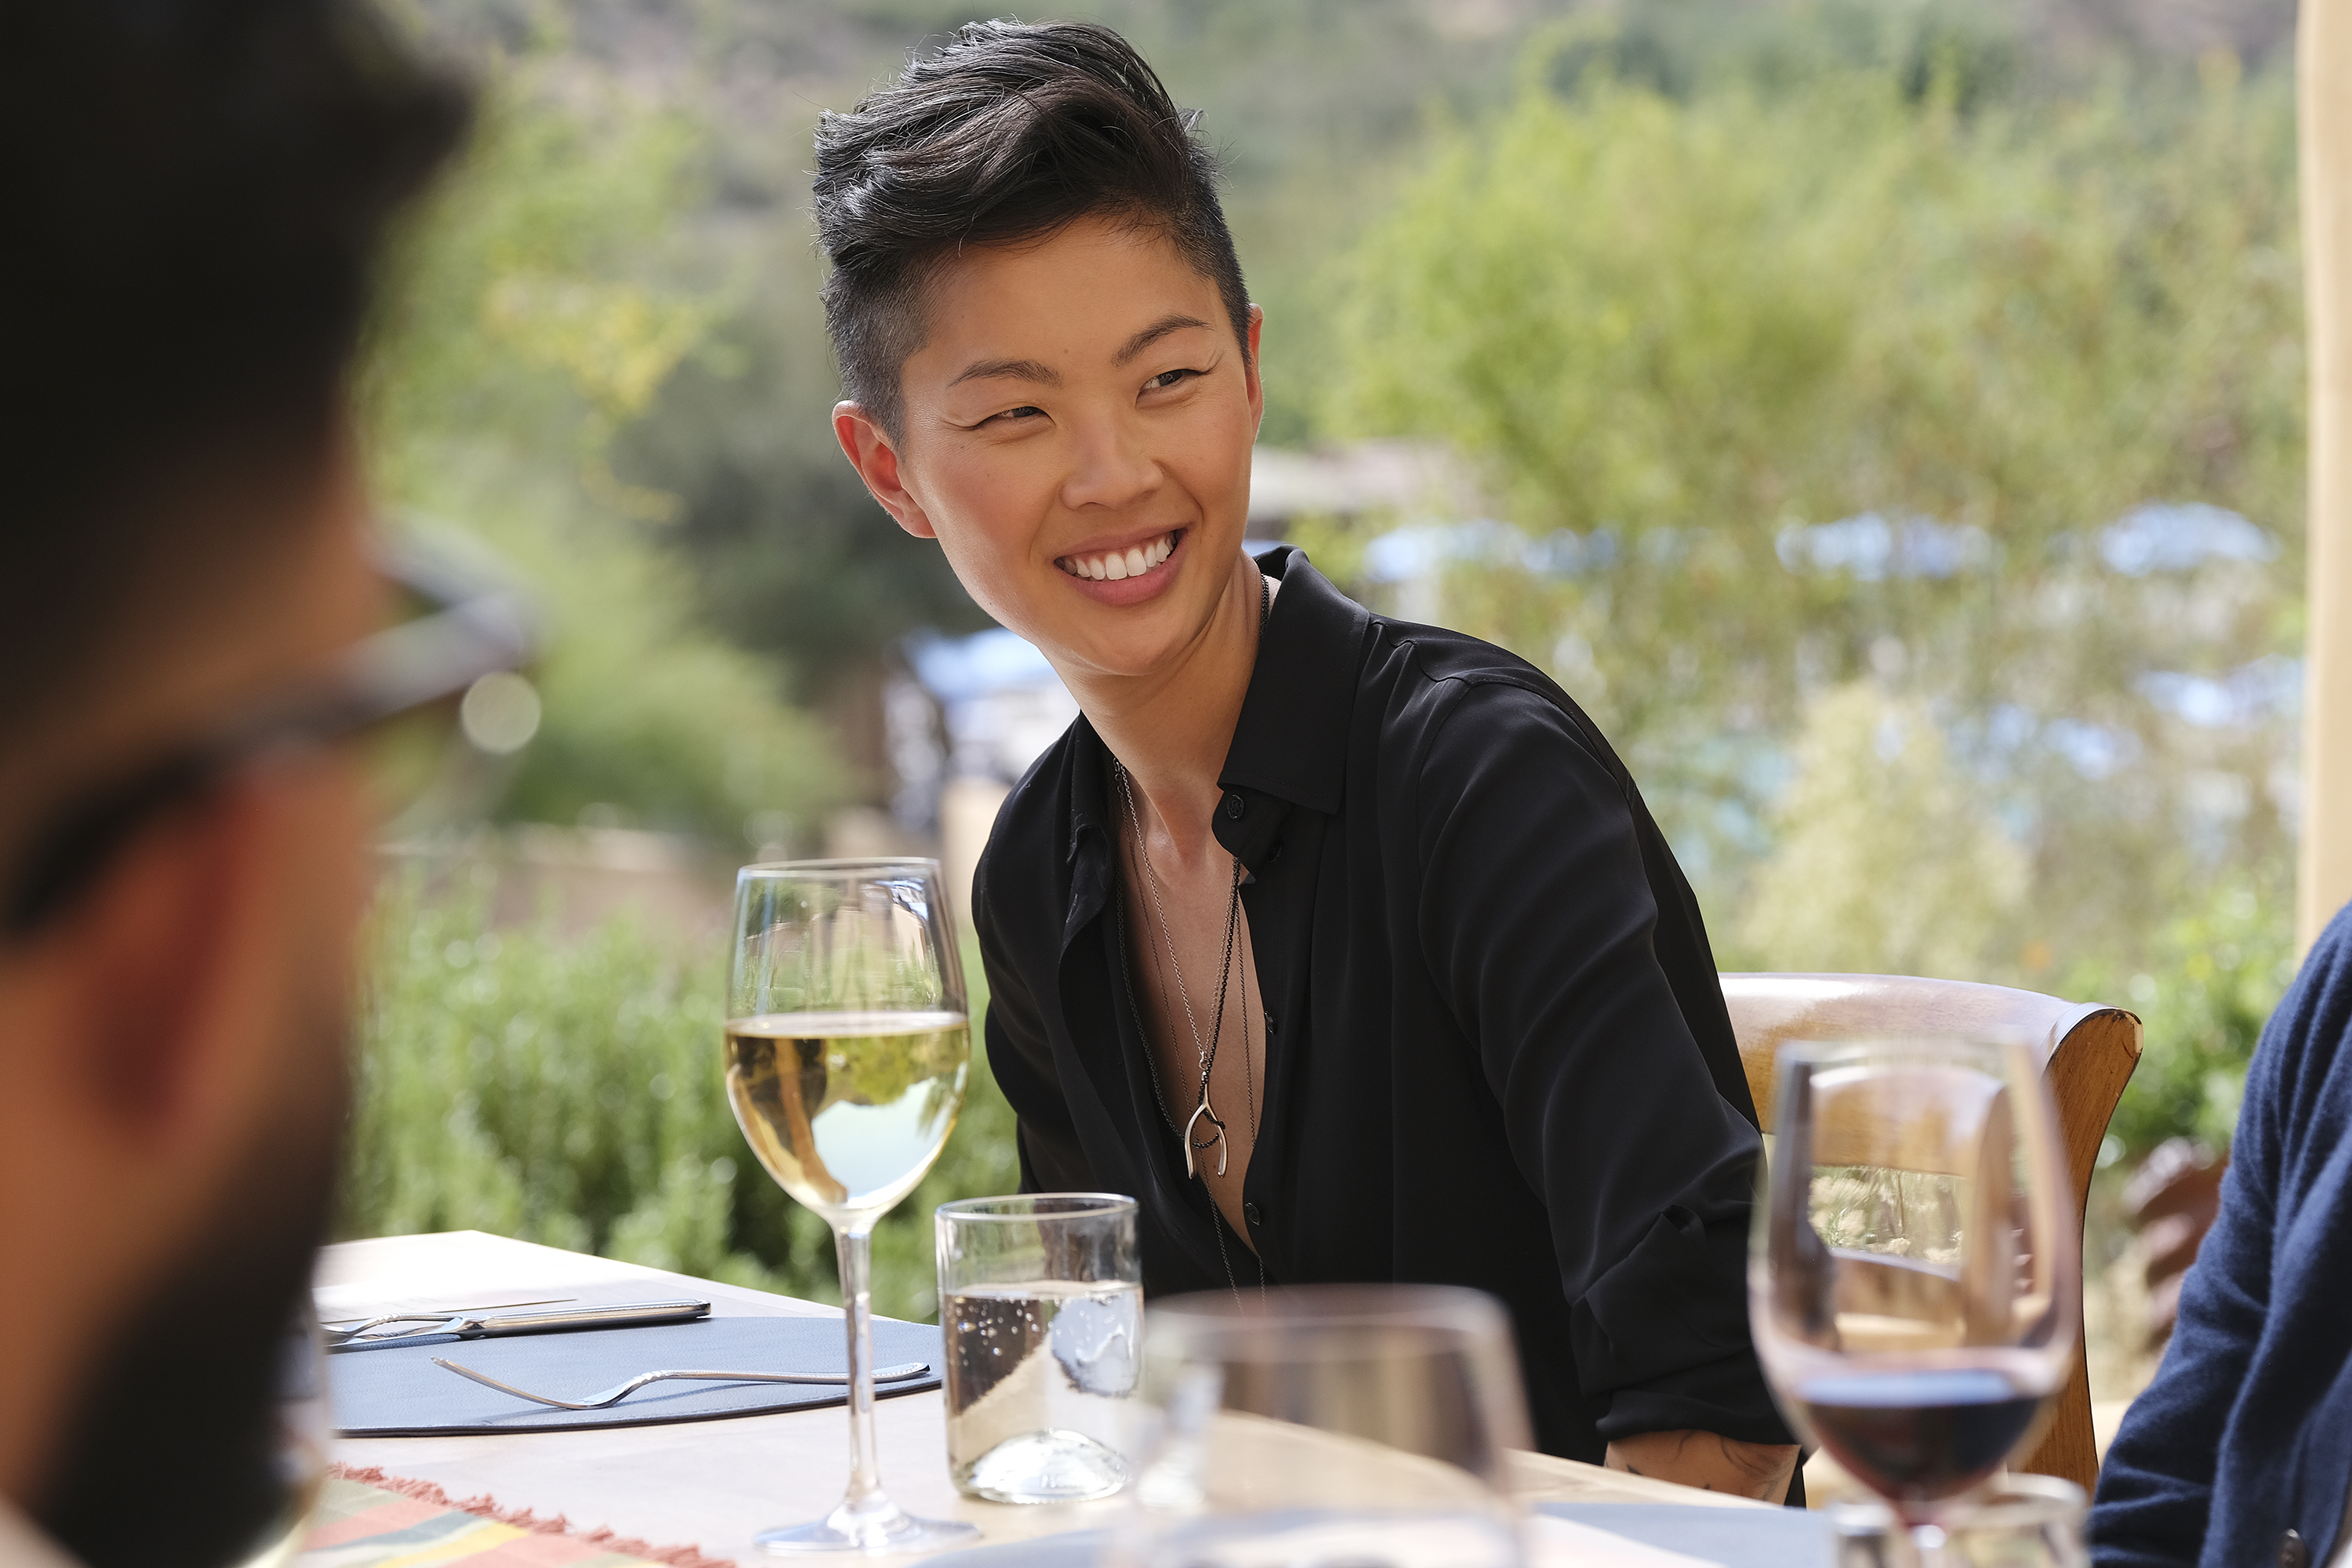 Kristen Kish smiles in front of a background of faraway green trees during an episode of Top Chef Season 19. She wears a black shirt. There is a full glass of white wine in front of her. 